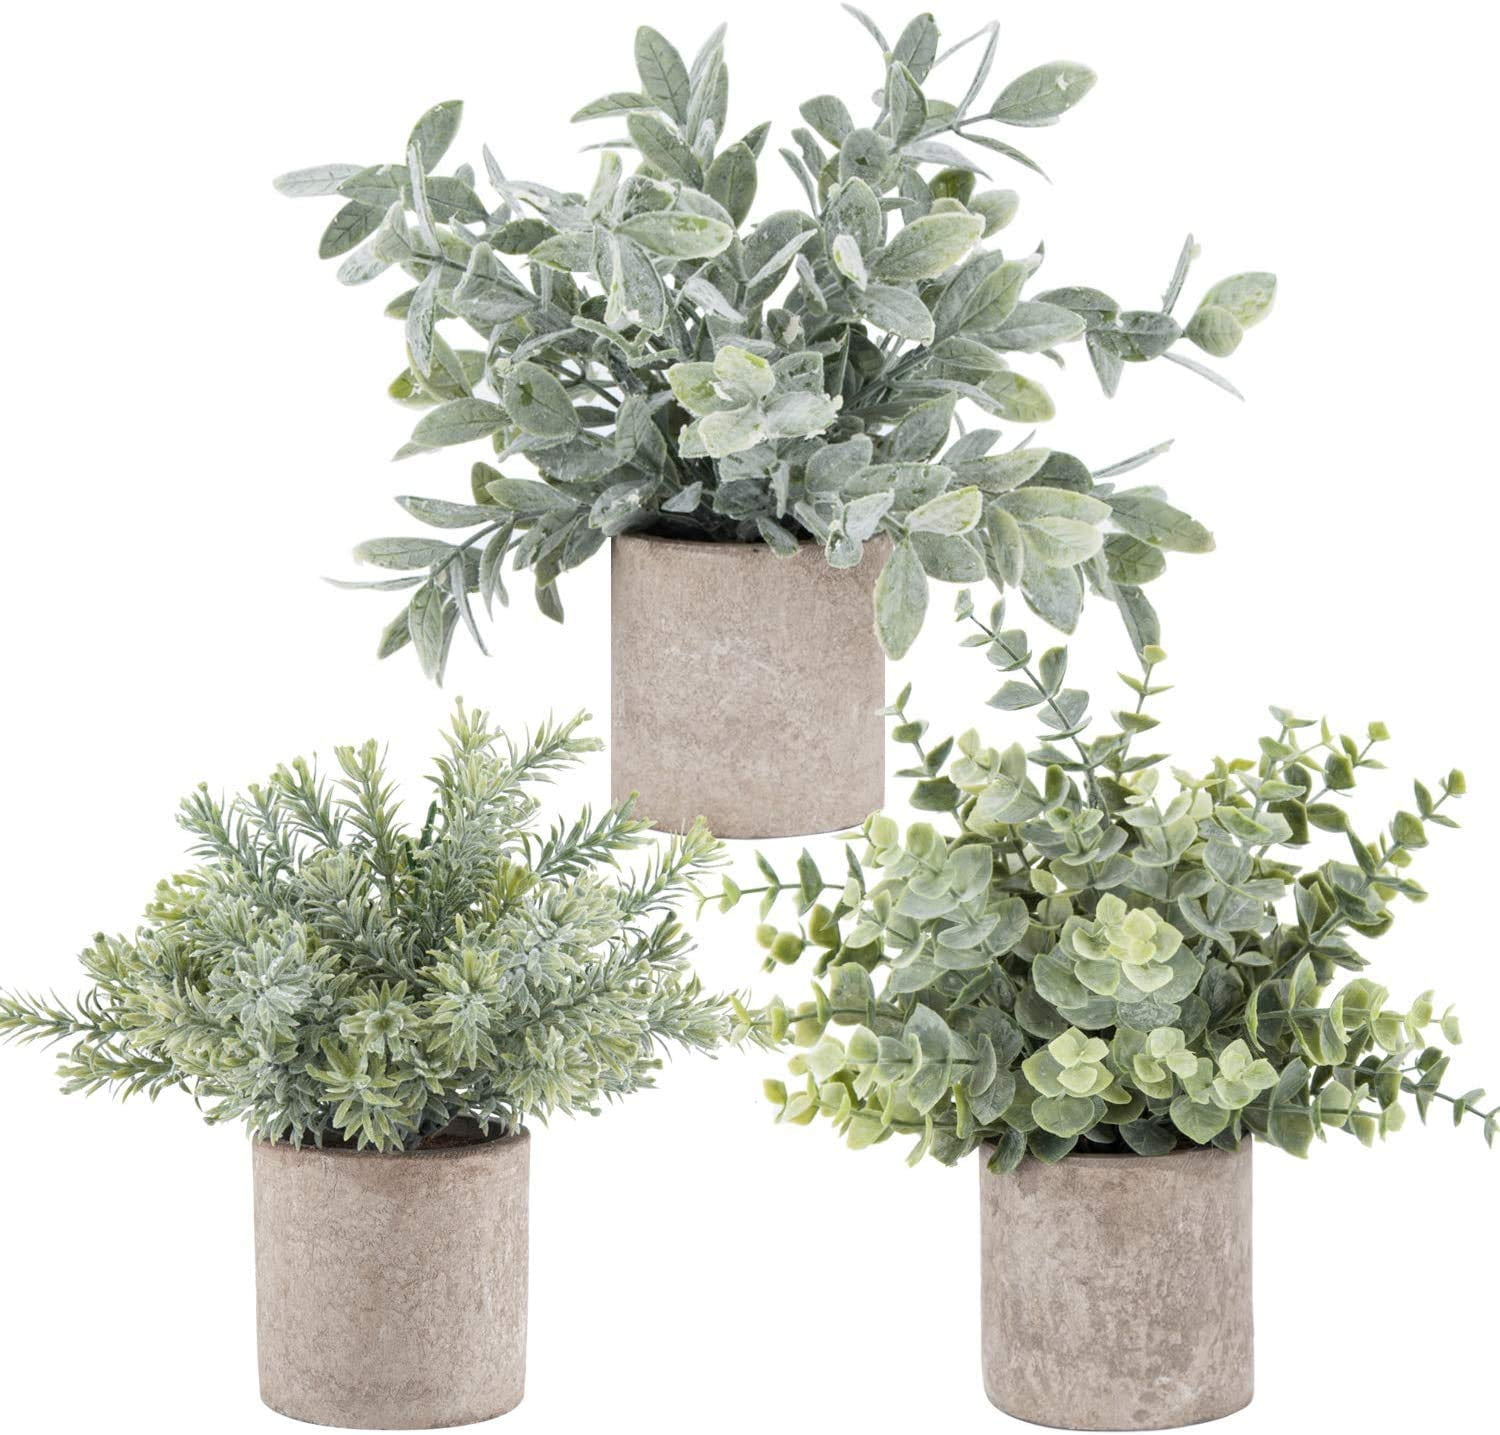 4 Pack Artificial Plants indoors in Pots,Small Artificial Plants Desk Plant for Home,Artificial Eucalyptus,Artificial Succulent,Faux Plants for indoors,Office,Bathroom,Kitchen Desk Decoration